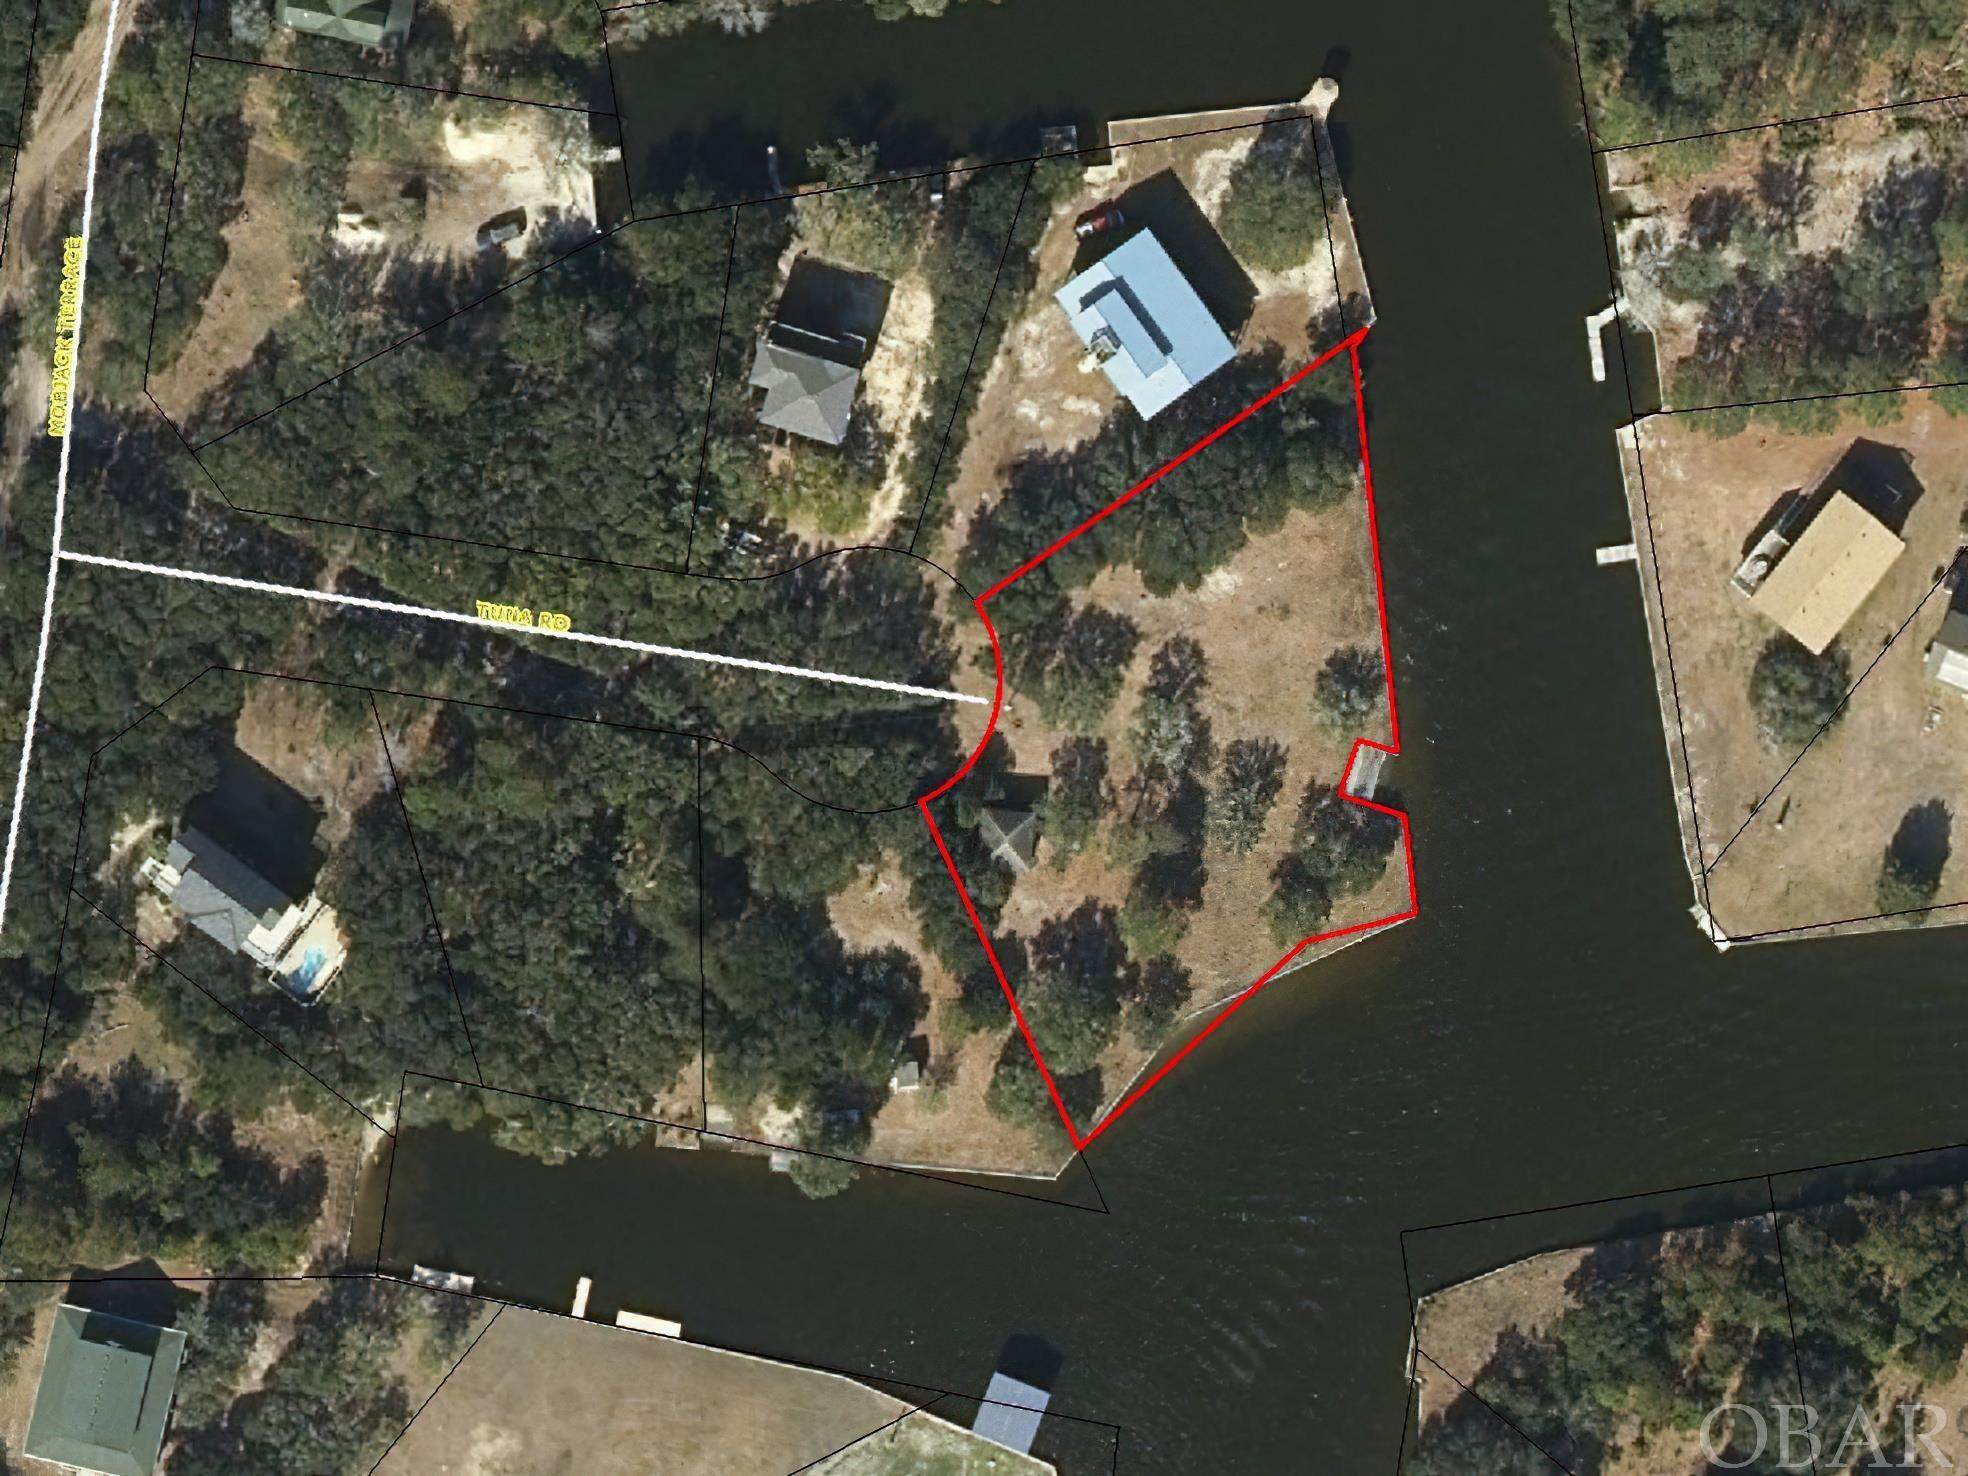 Check out this oversized canalfront lot with easy access to the Currituck Sound. This used to be two adjoining lots that have been recombined into one GIANT lot with approximately 370 feet of water frontage already bulkheaded with a boat ramp for getting your toys in & out of the water that much easier. There is a  a recent survey and Perc Test already on file for 2 different locations. Enjoy life with the Corolla Wild Horses during the day and watching the sun setting over the sound at night.